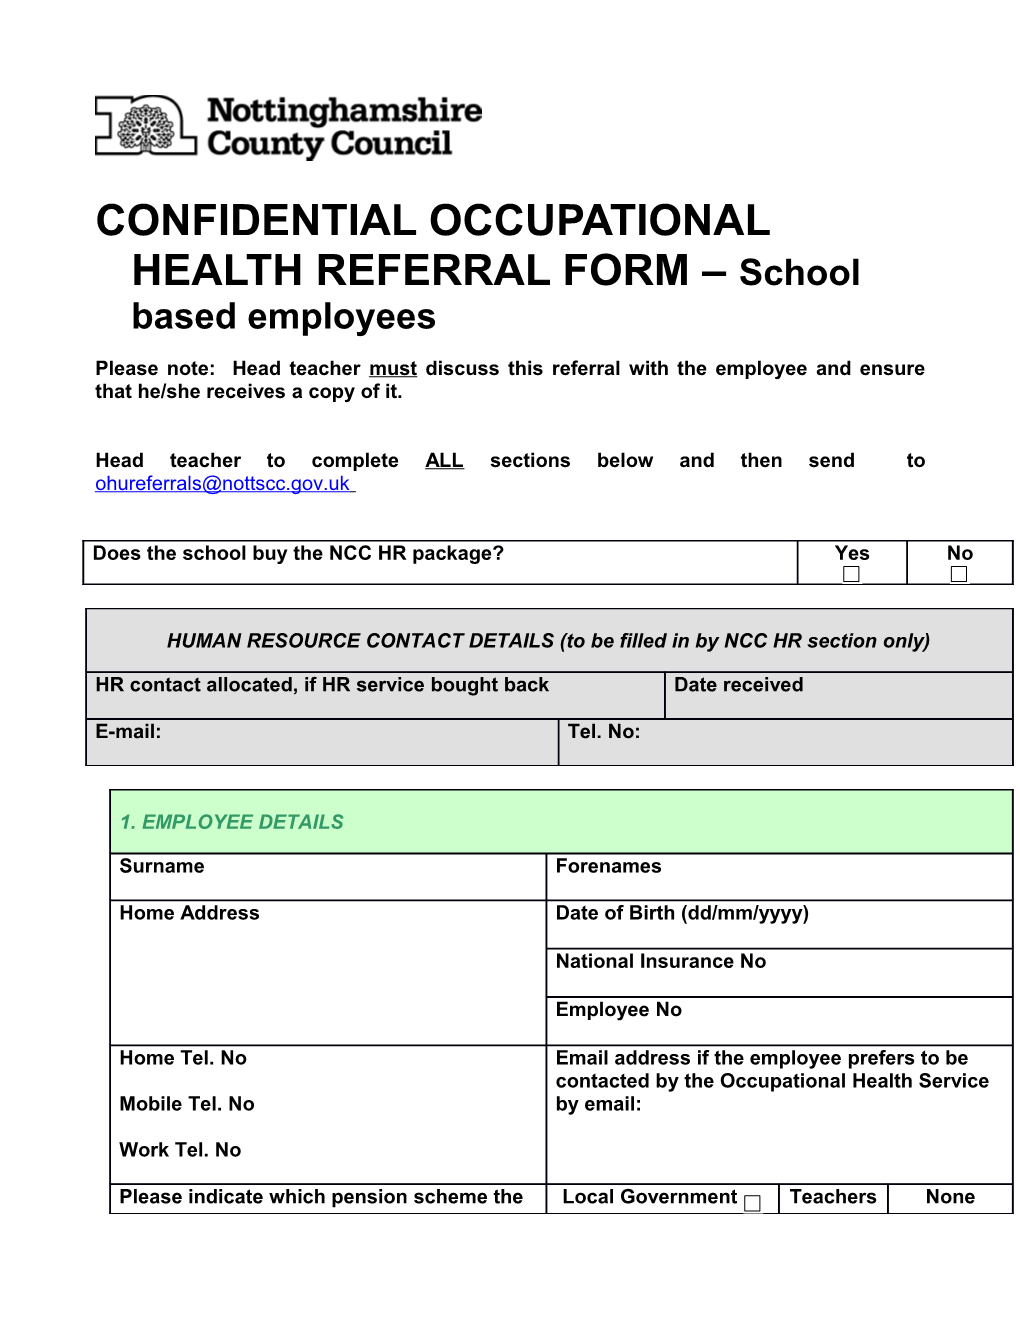 Occupational Health Referral Form School Based Employees April 2014